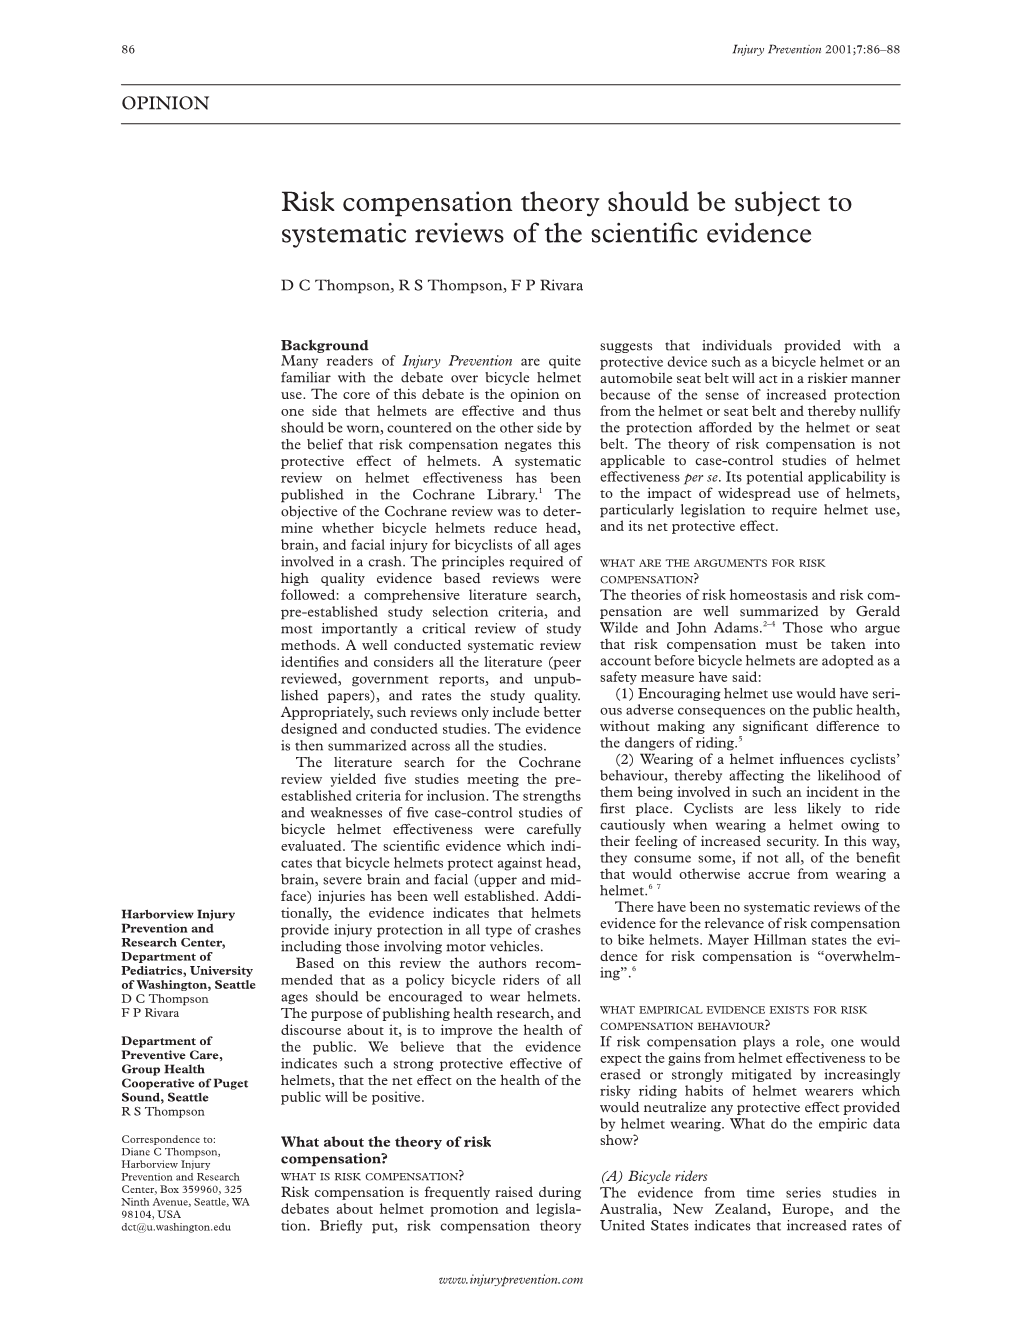 Risk Compensation Theory Should Be Subject to Systematic Reviews of the Scientiﬁc Evidence